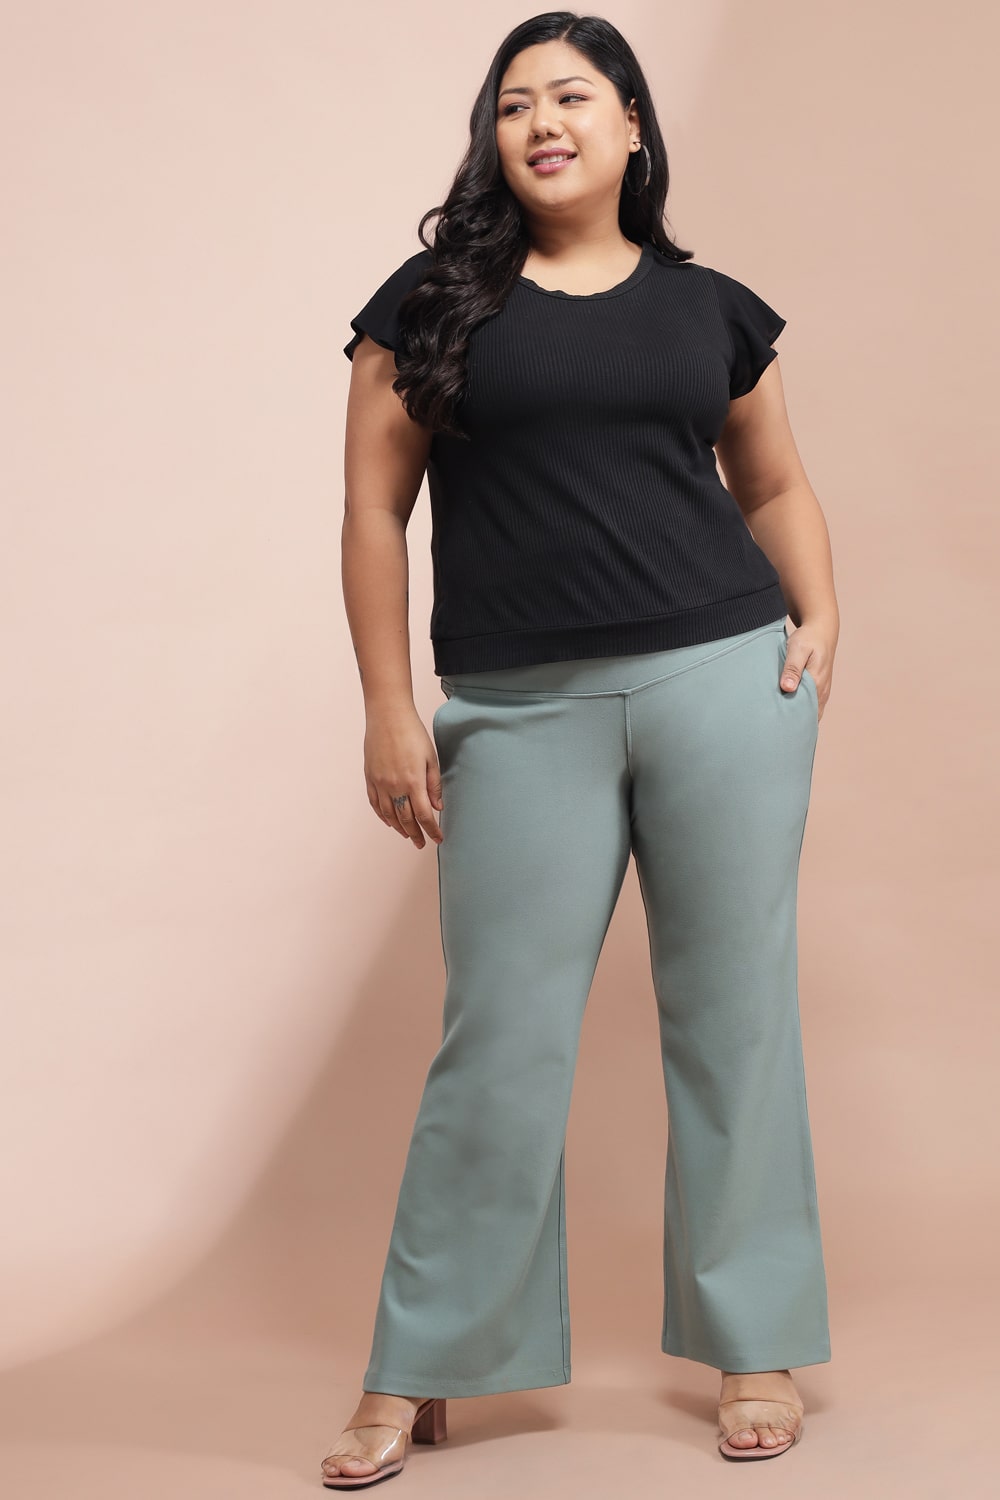 Best PlusSize Clothing of 2023 According to Stylists